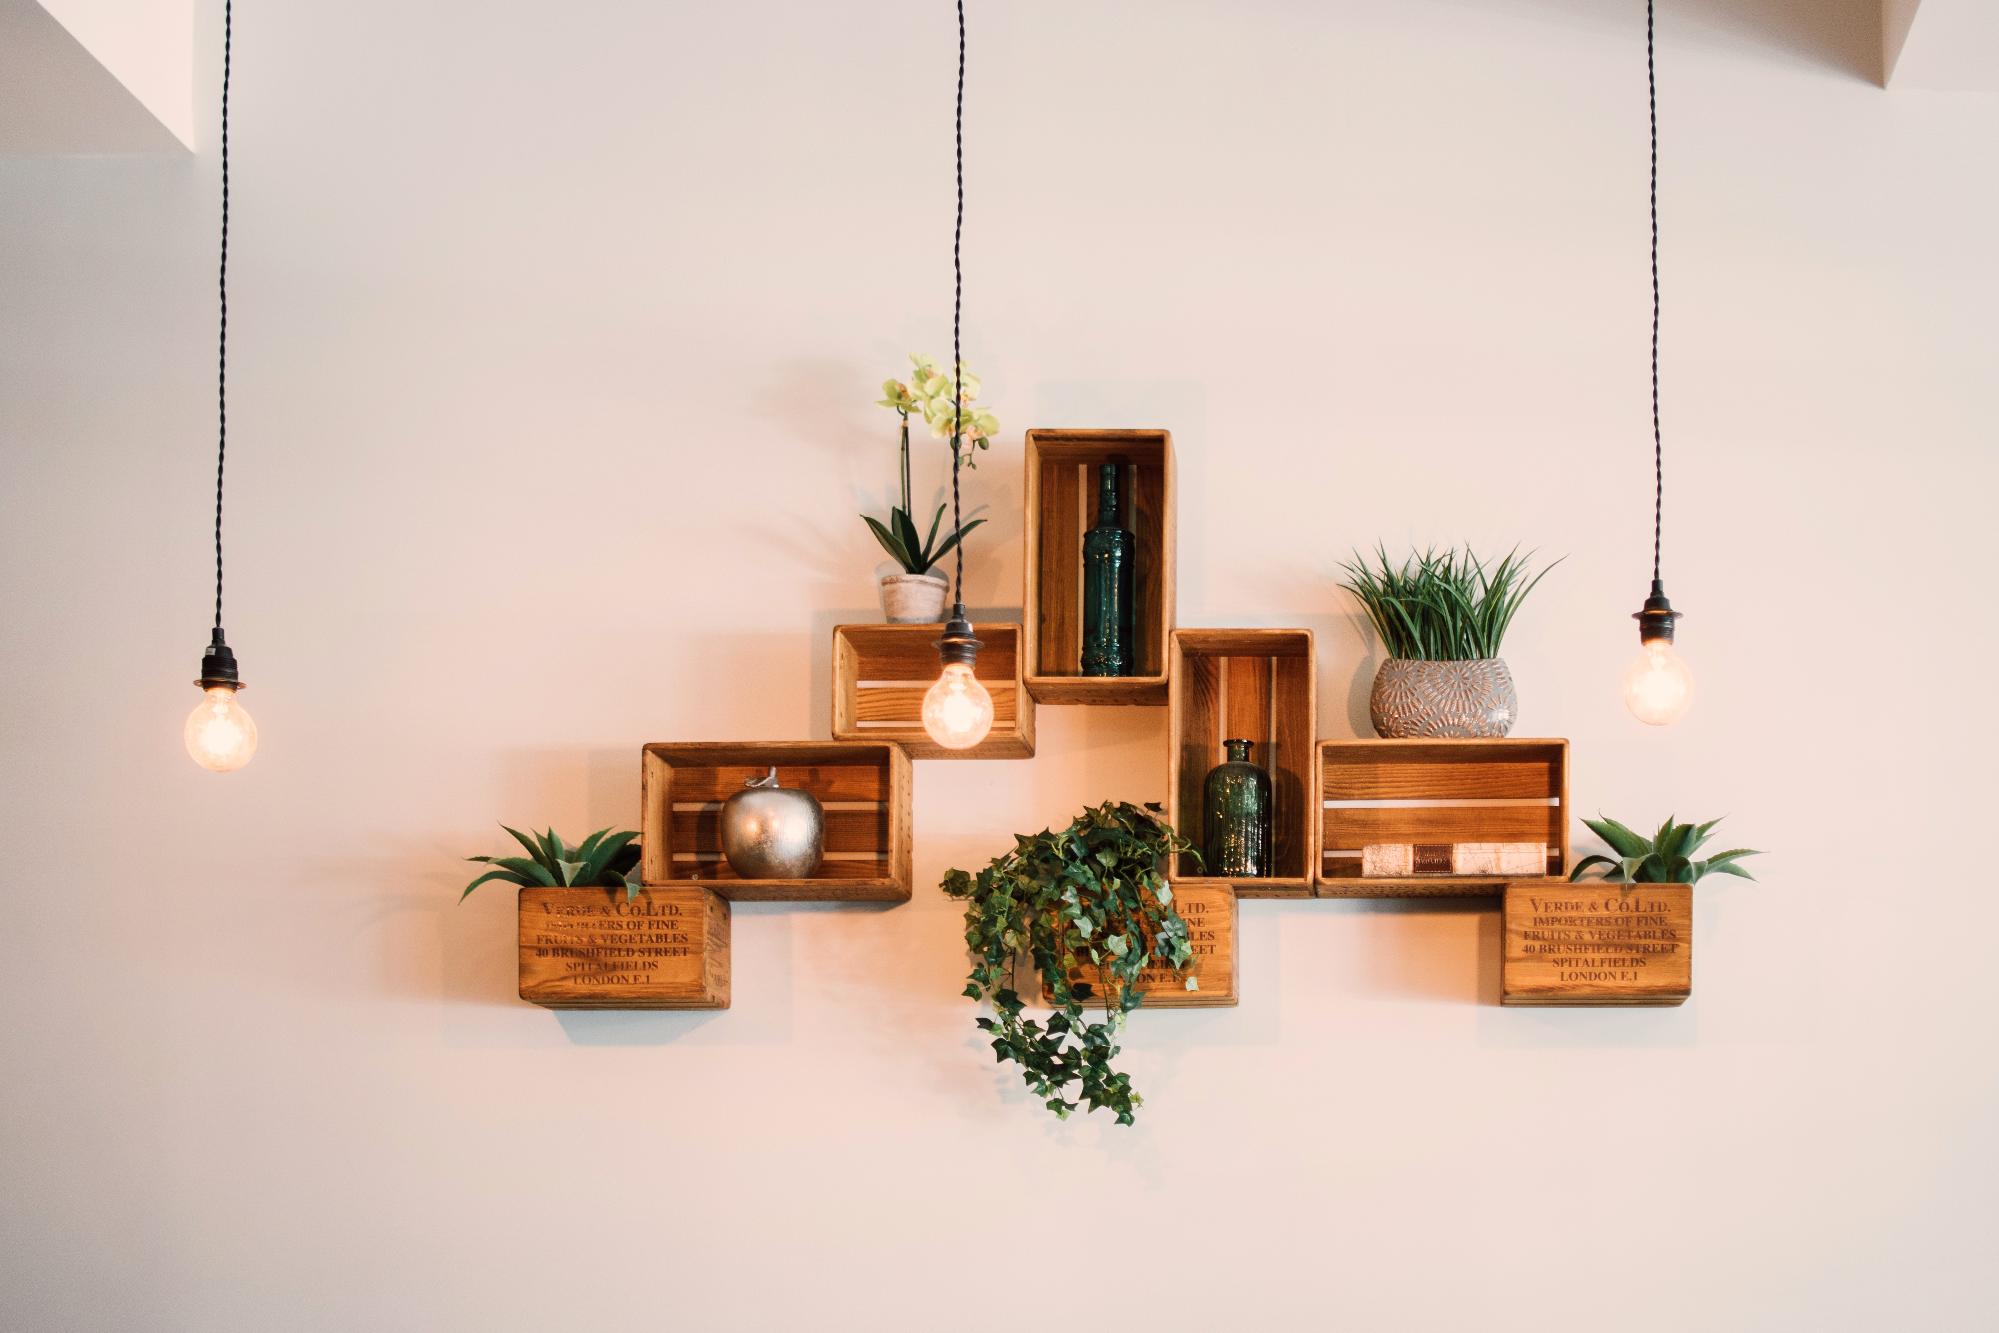 Wooden shelves with plants hanging on the wall, transformed by trendy upcycling ideas.